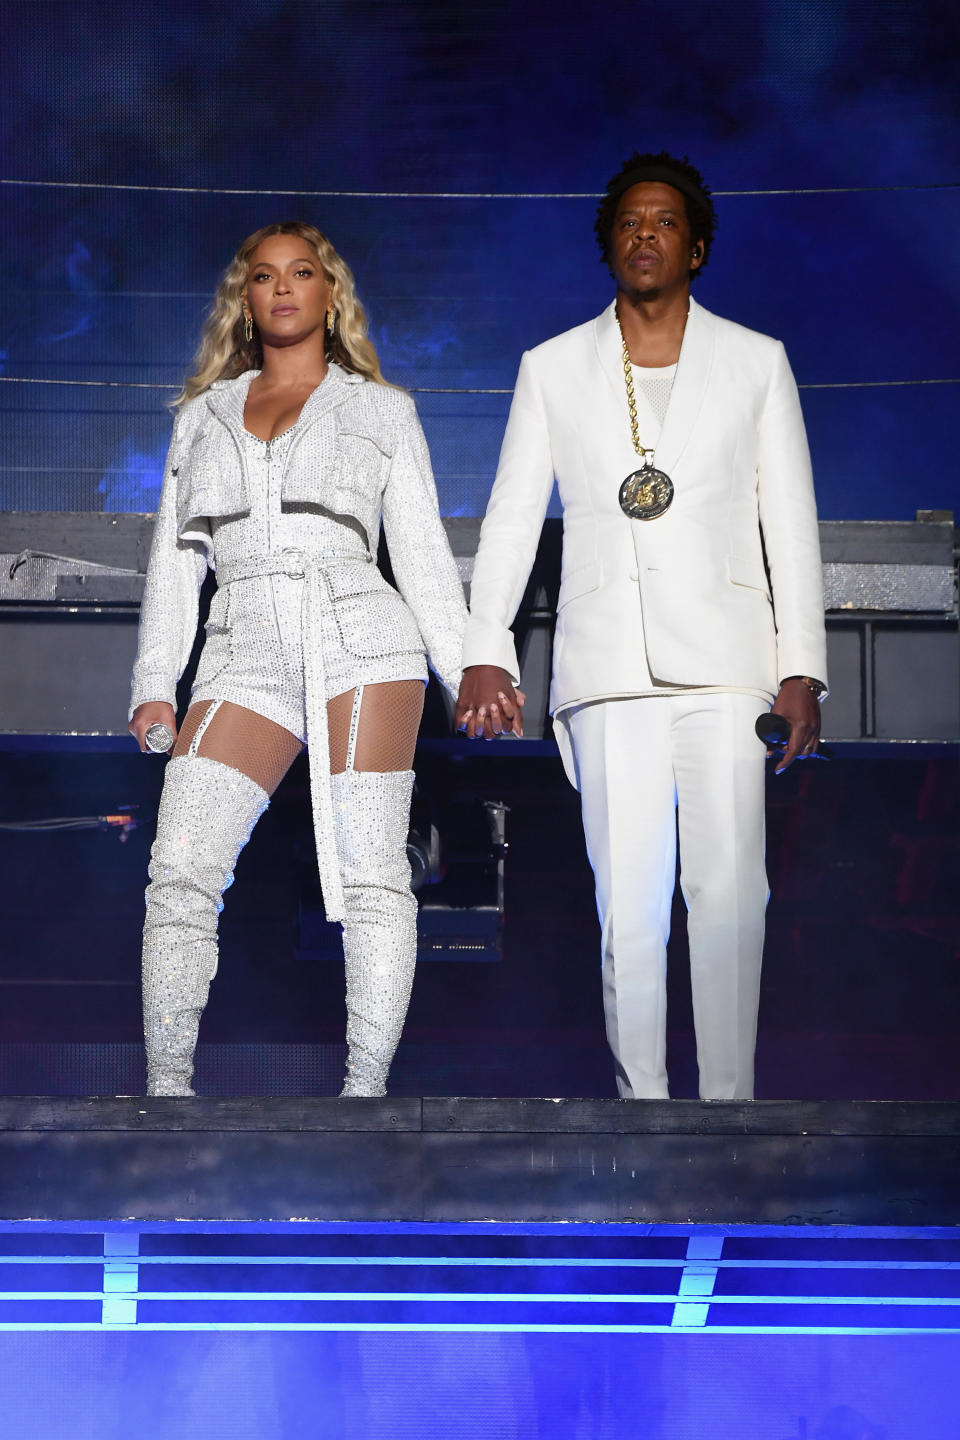 Beyonc&eacute; and Jay Z are one of the most stylish couples around. It makes sense, then, that when they decided to tour together, their show costumes were perfectly coordinated. In this photo, the two stand onstage during a performance in Cleveland in 2018.